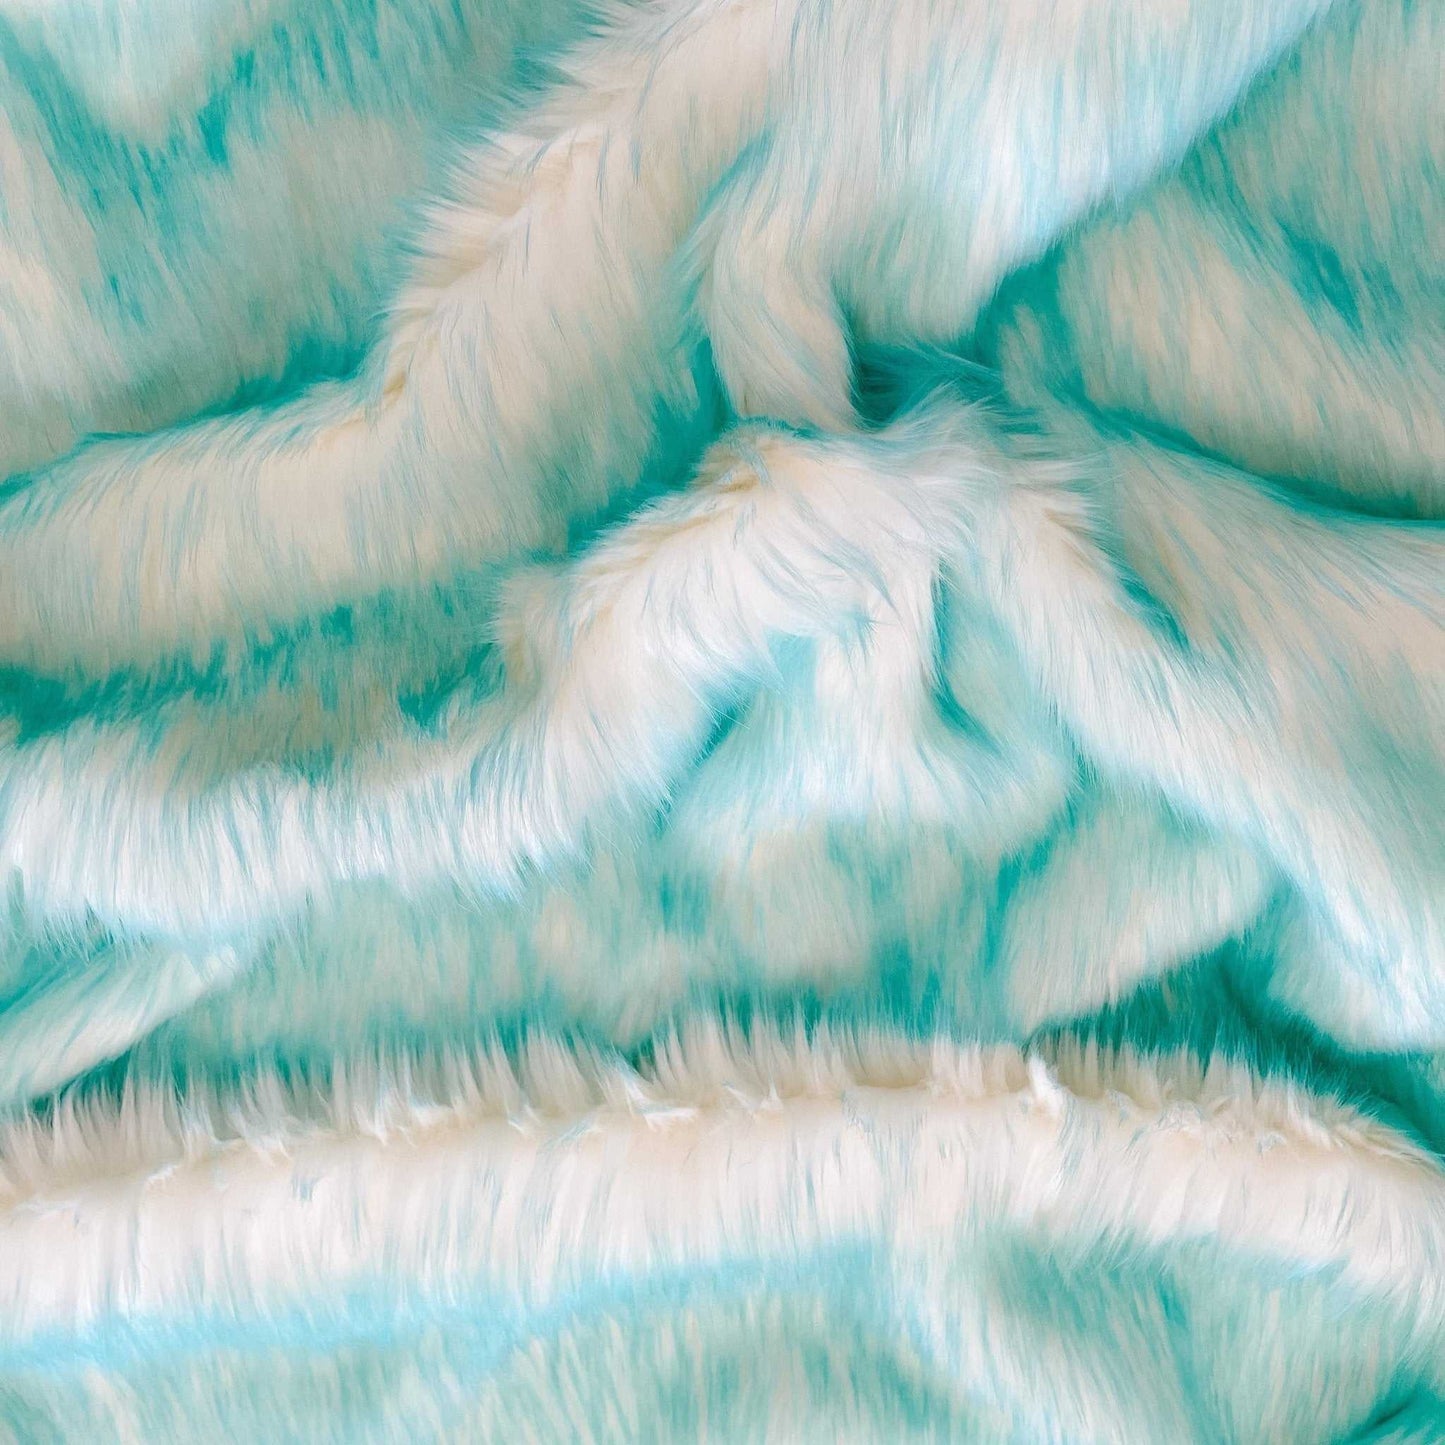 Aqua Faux Fur Fabric by the Yard or Meter | Teal Pompom Fur, Arts & Crafts, Decor, Costume Faux Fur Fabric 4 $ Buttons & Beans Co.